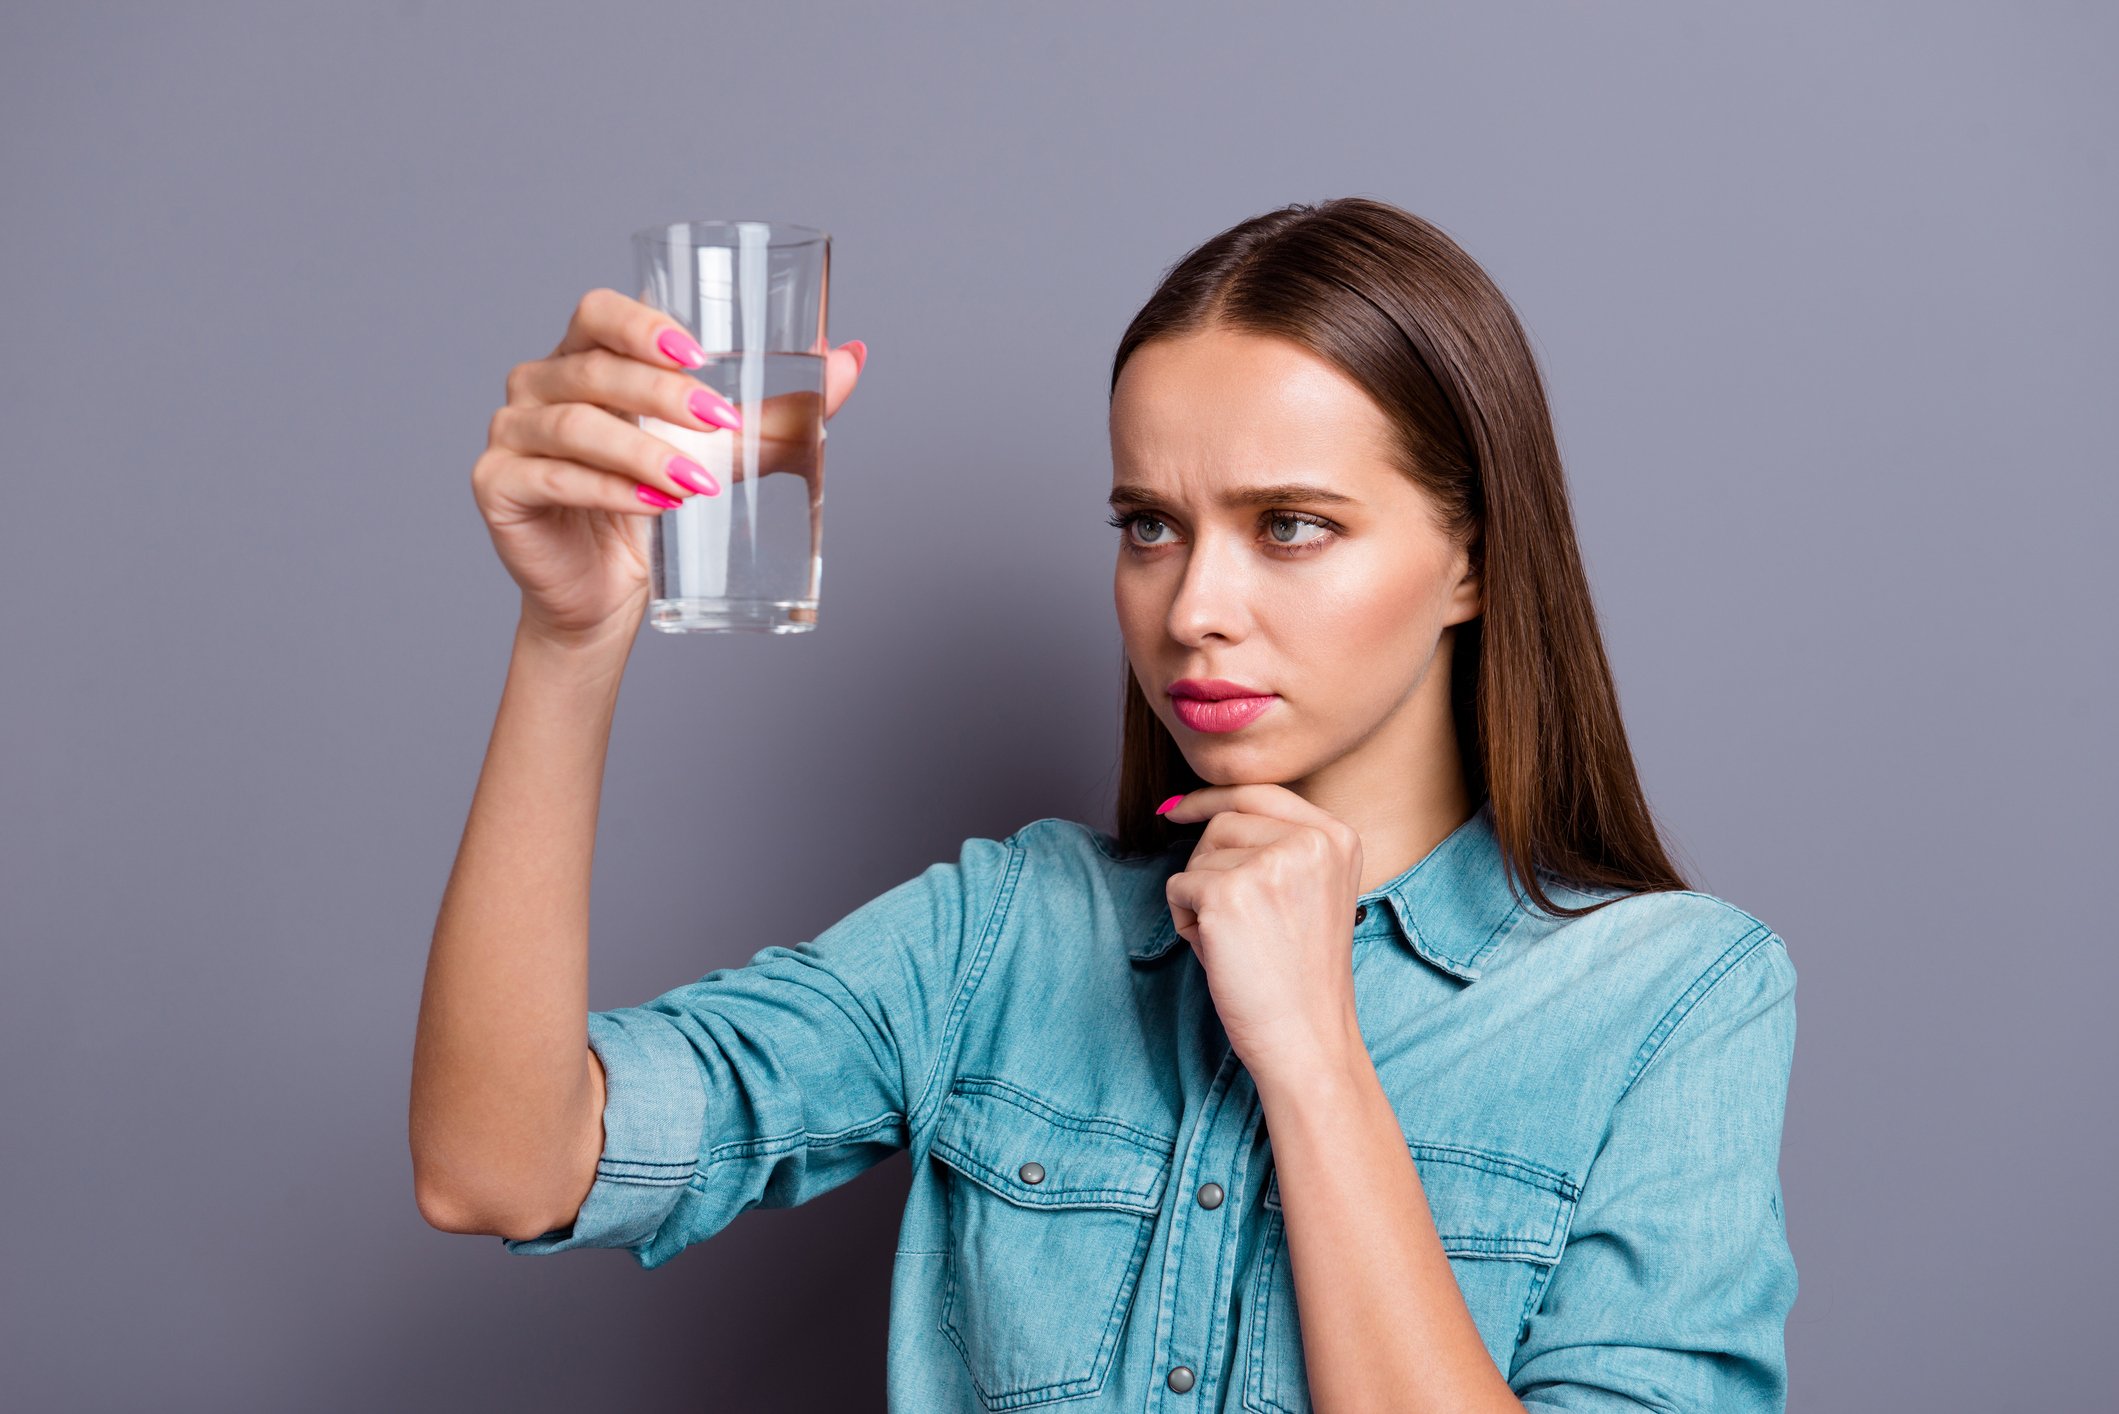 woman looking at a glass of water for chloramine and chloroform